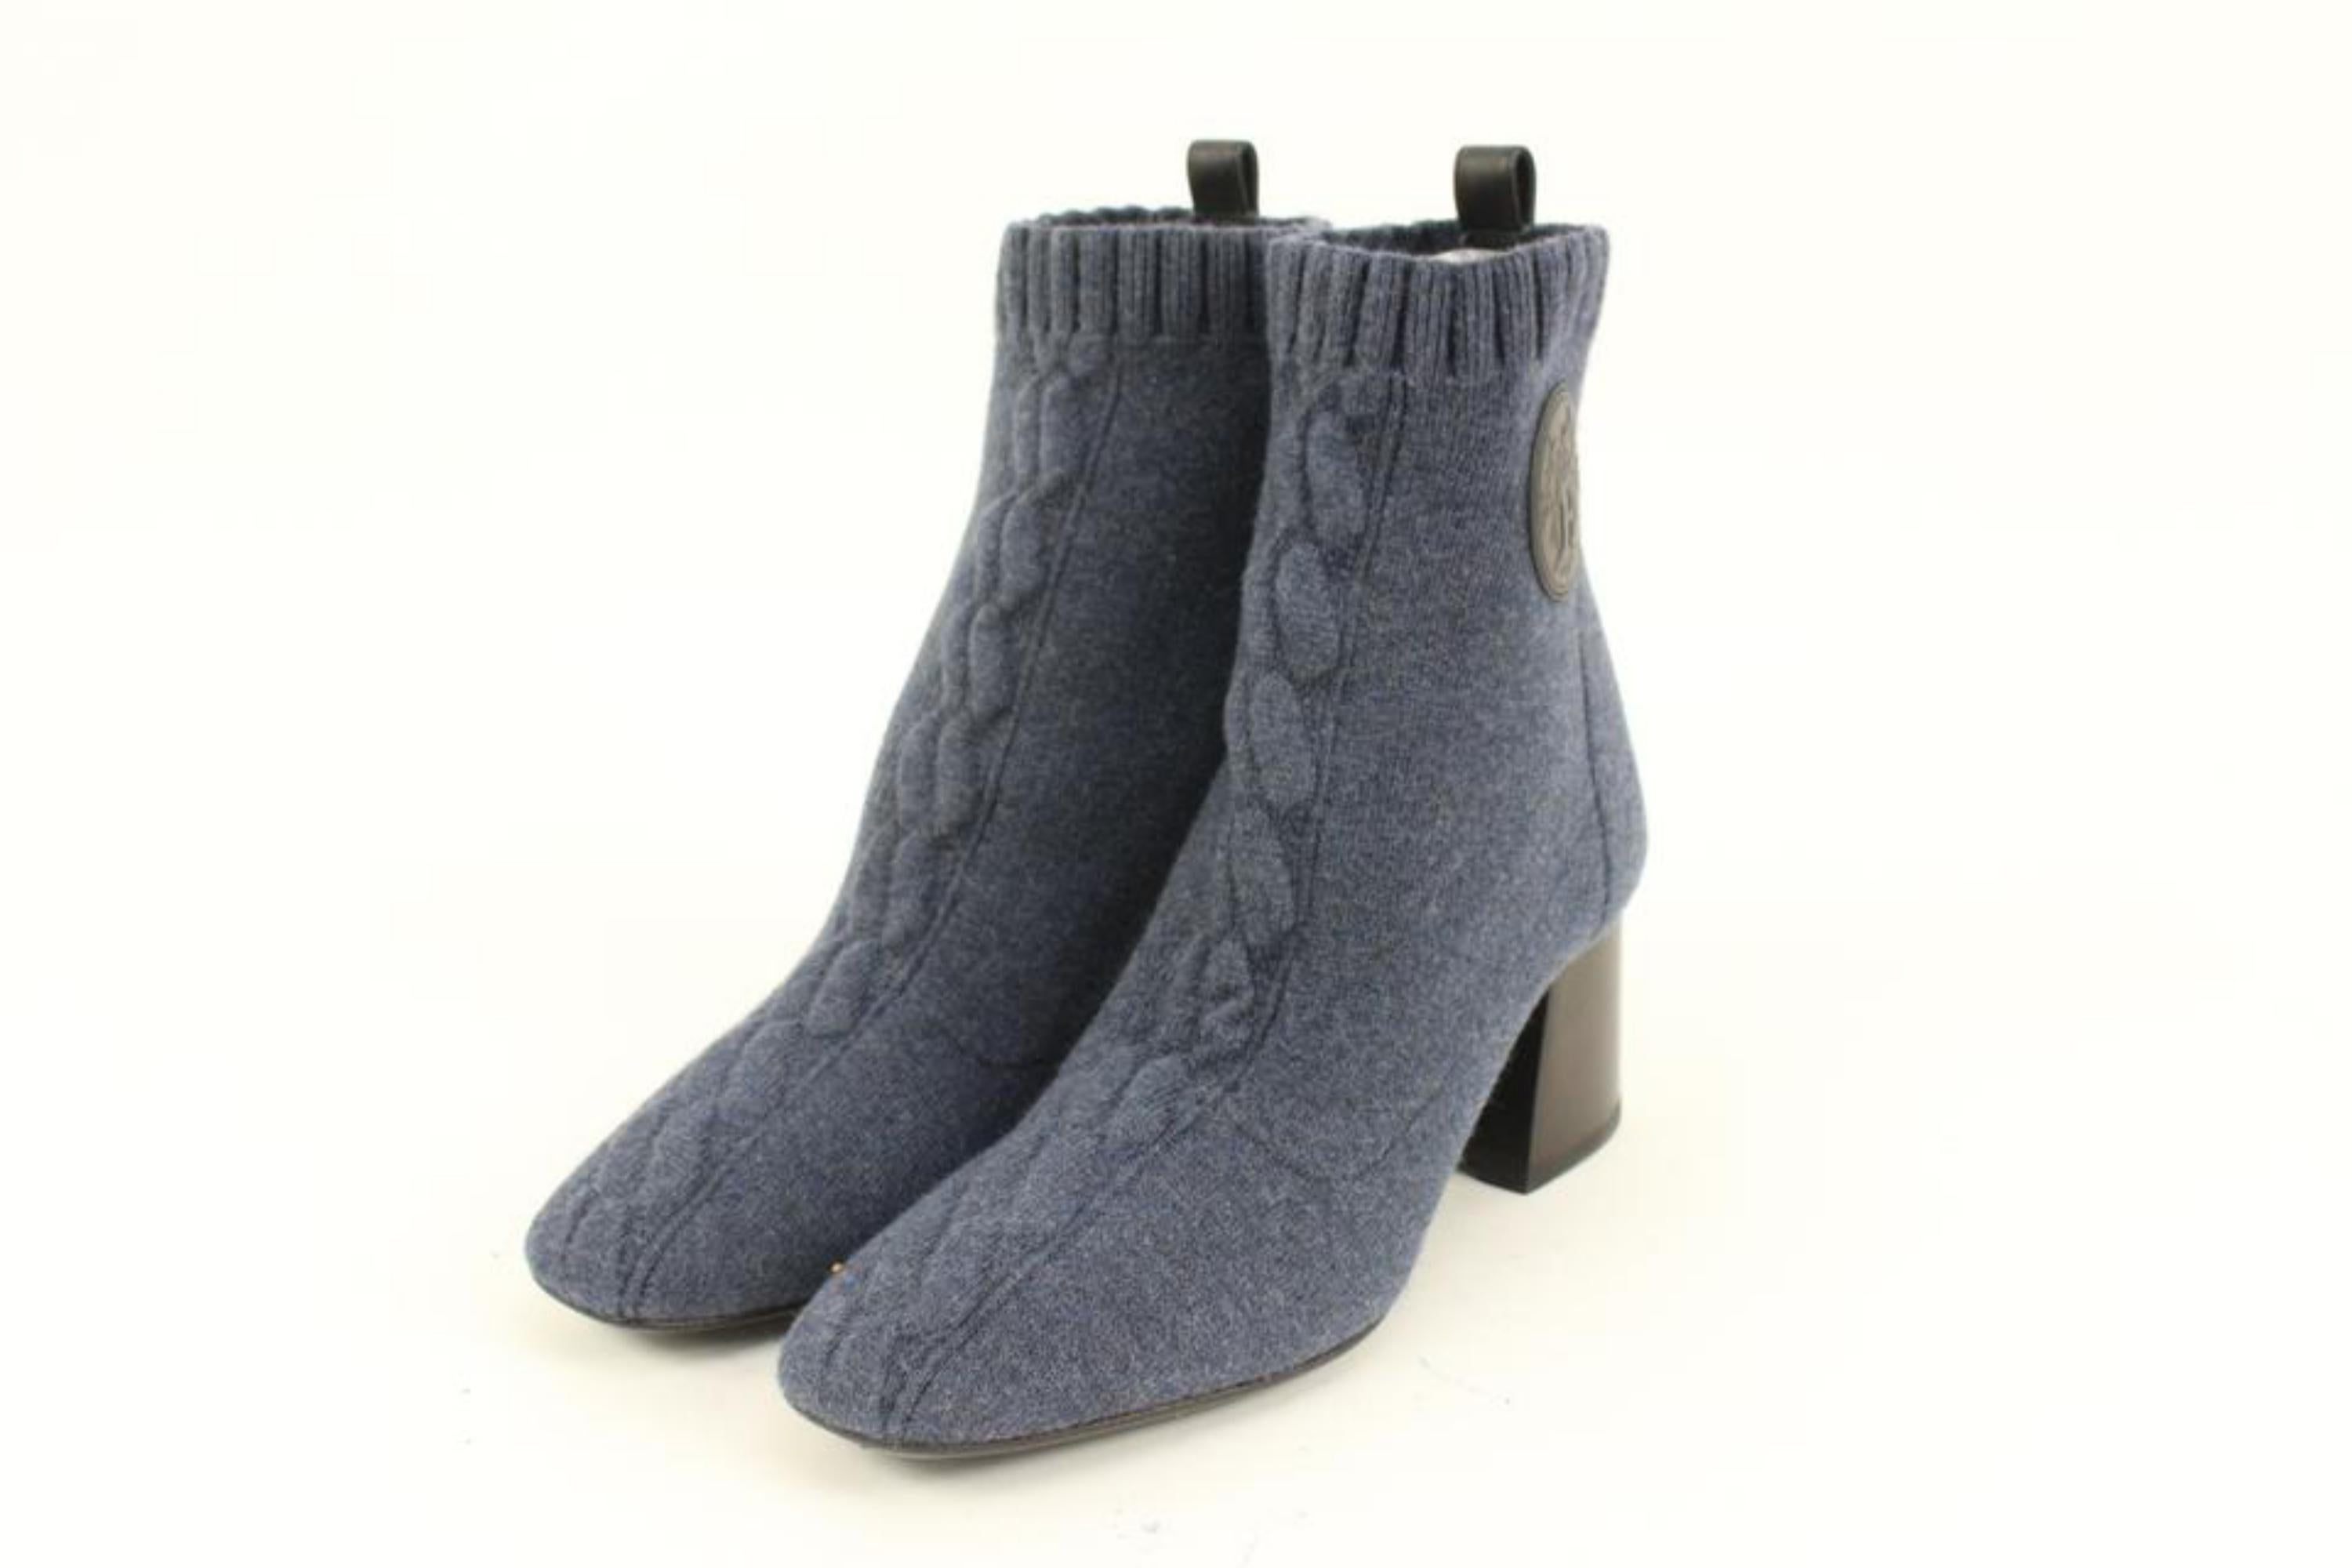 Hermès Women's Size 35 Blue Knit Fabric Volver 60 Ankle Booties 33h420s
Date Code/Serial Number: S212163Z210
Made In: Italy
Measurements: Length:  9